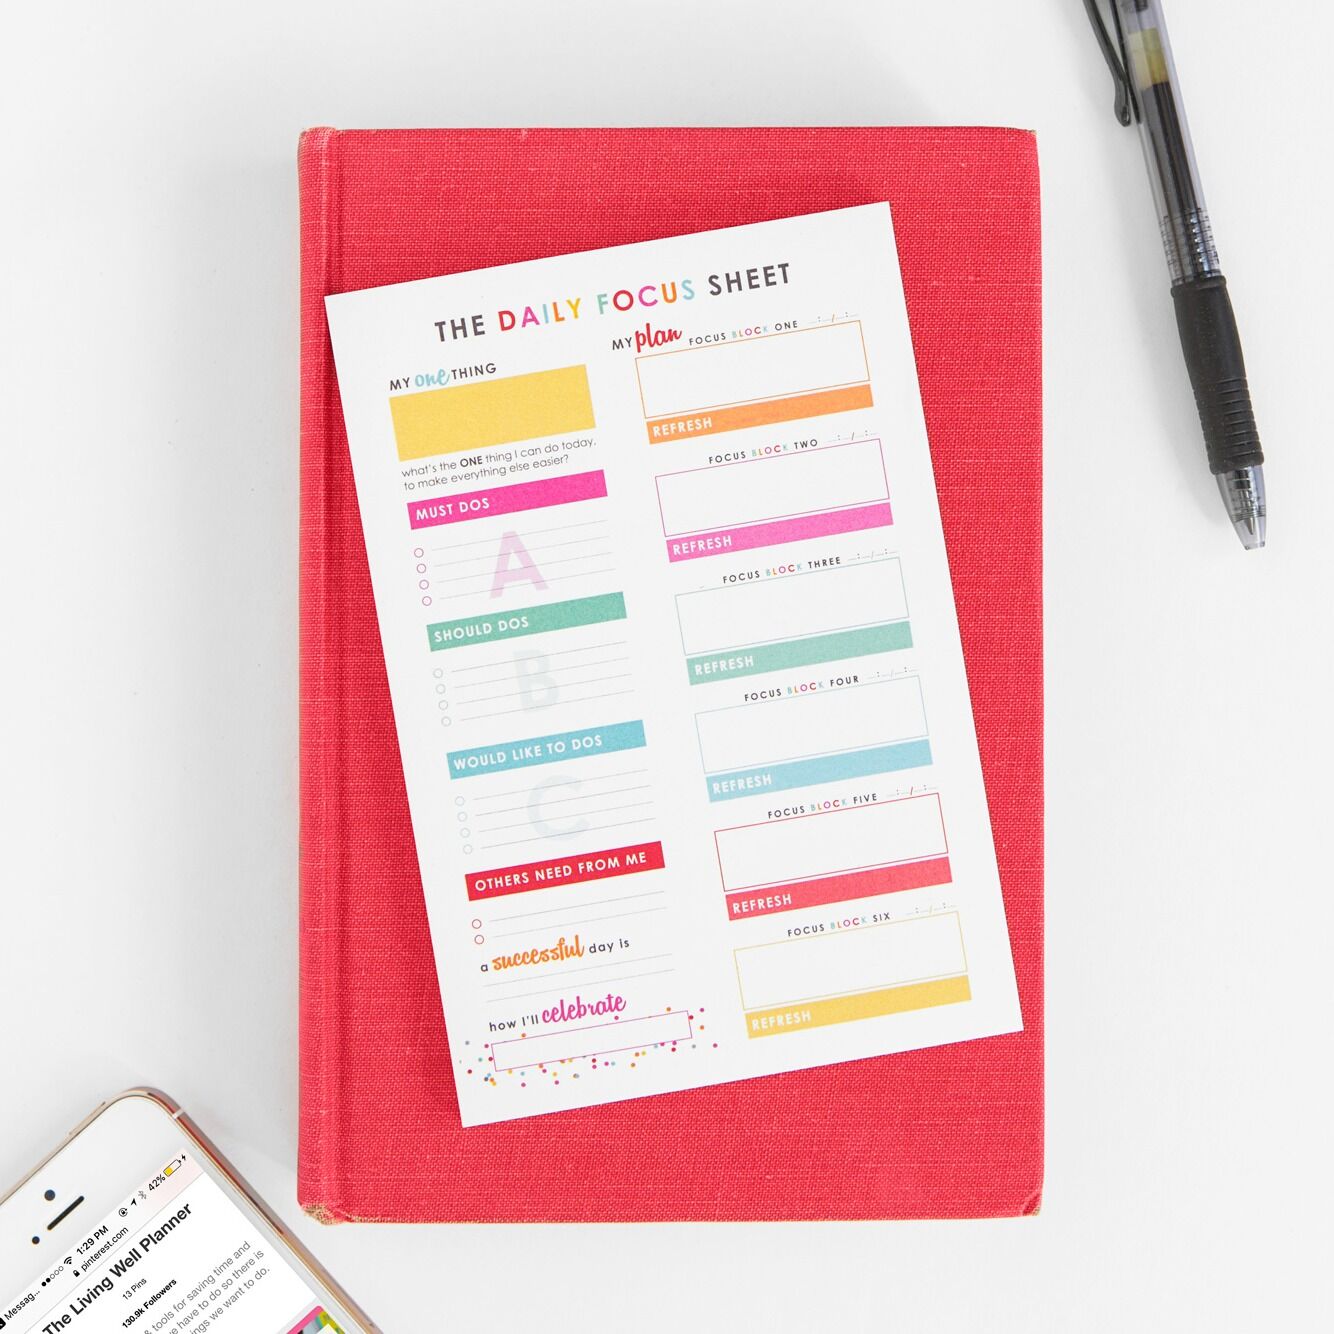 These Daily Focus sticky notes will help you prioritize your tasks. 